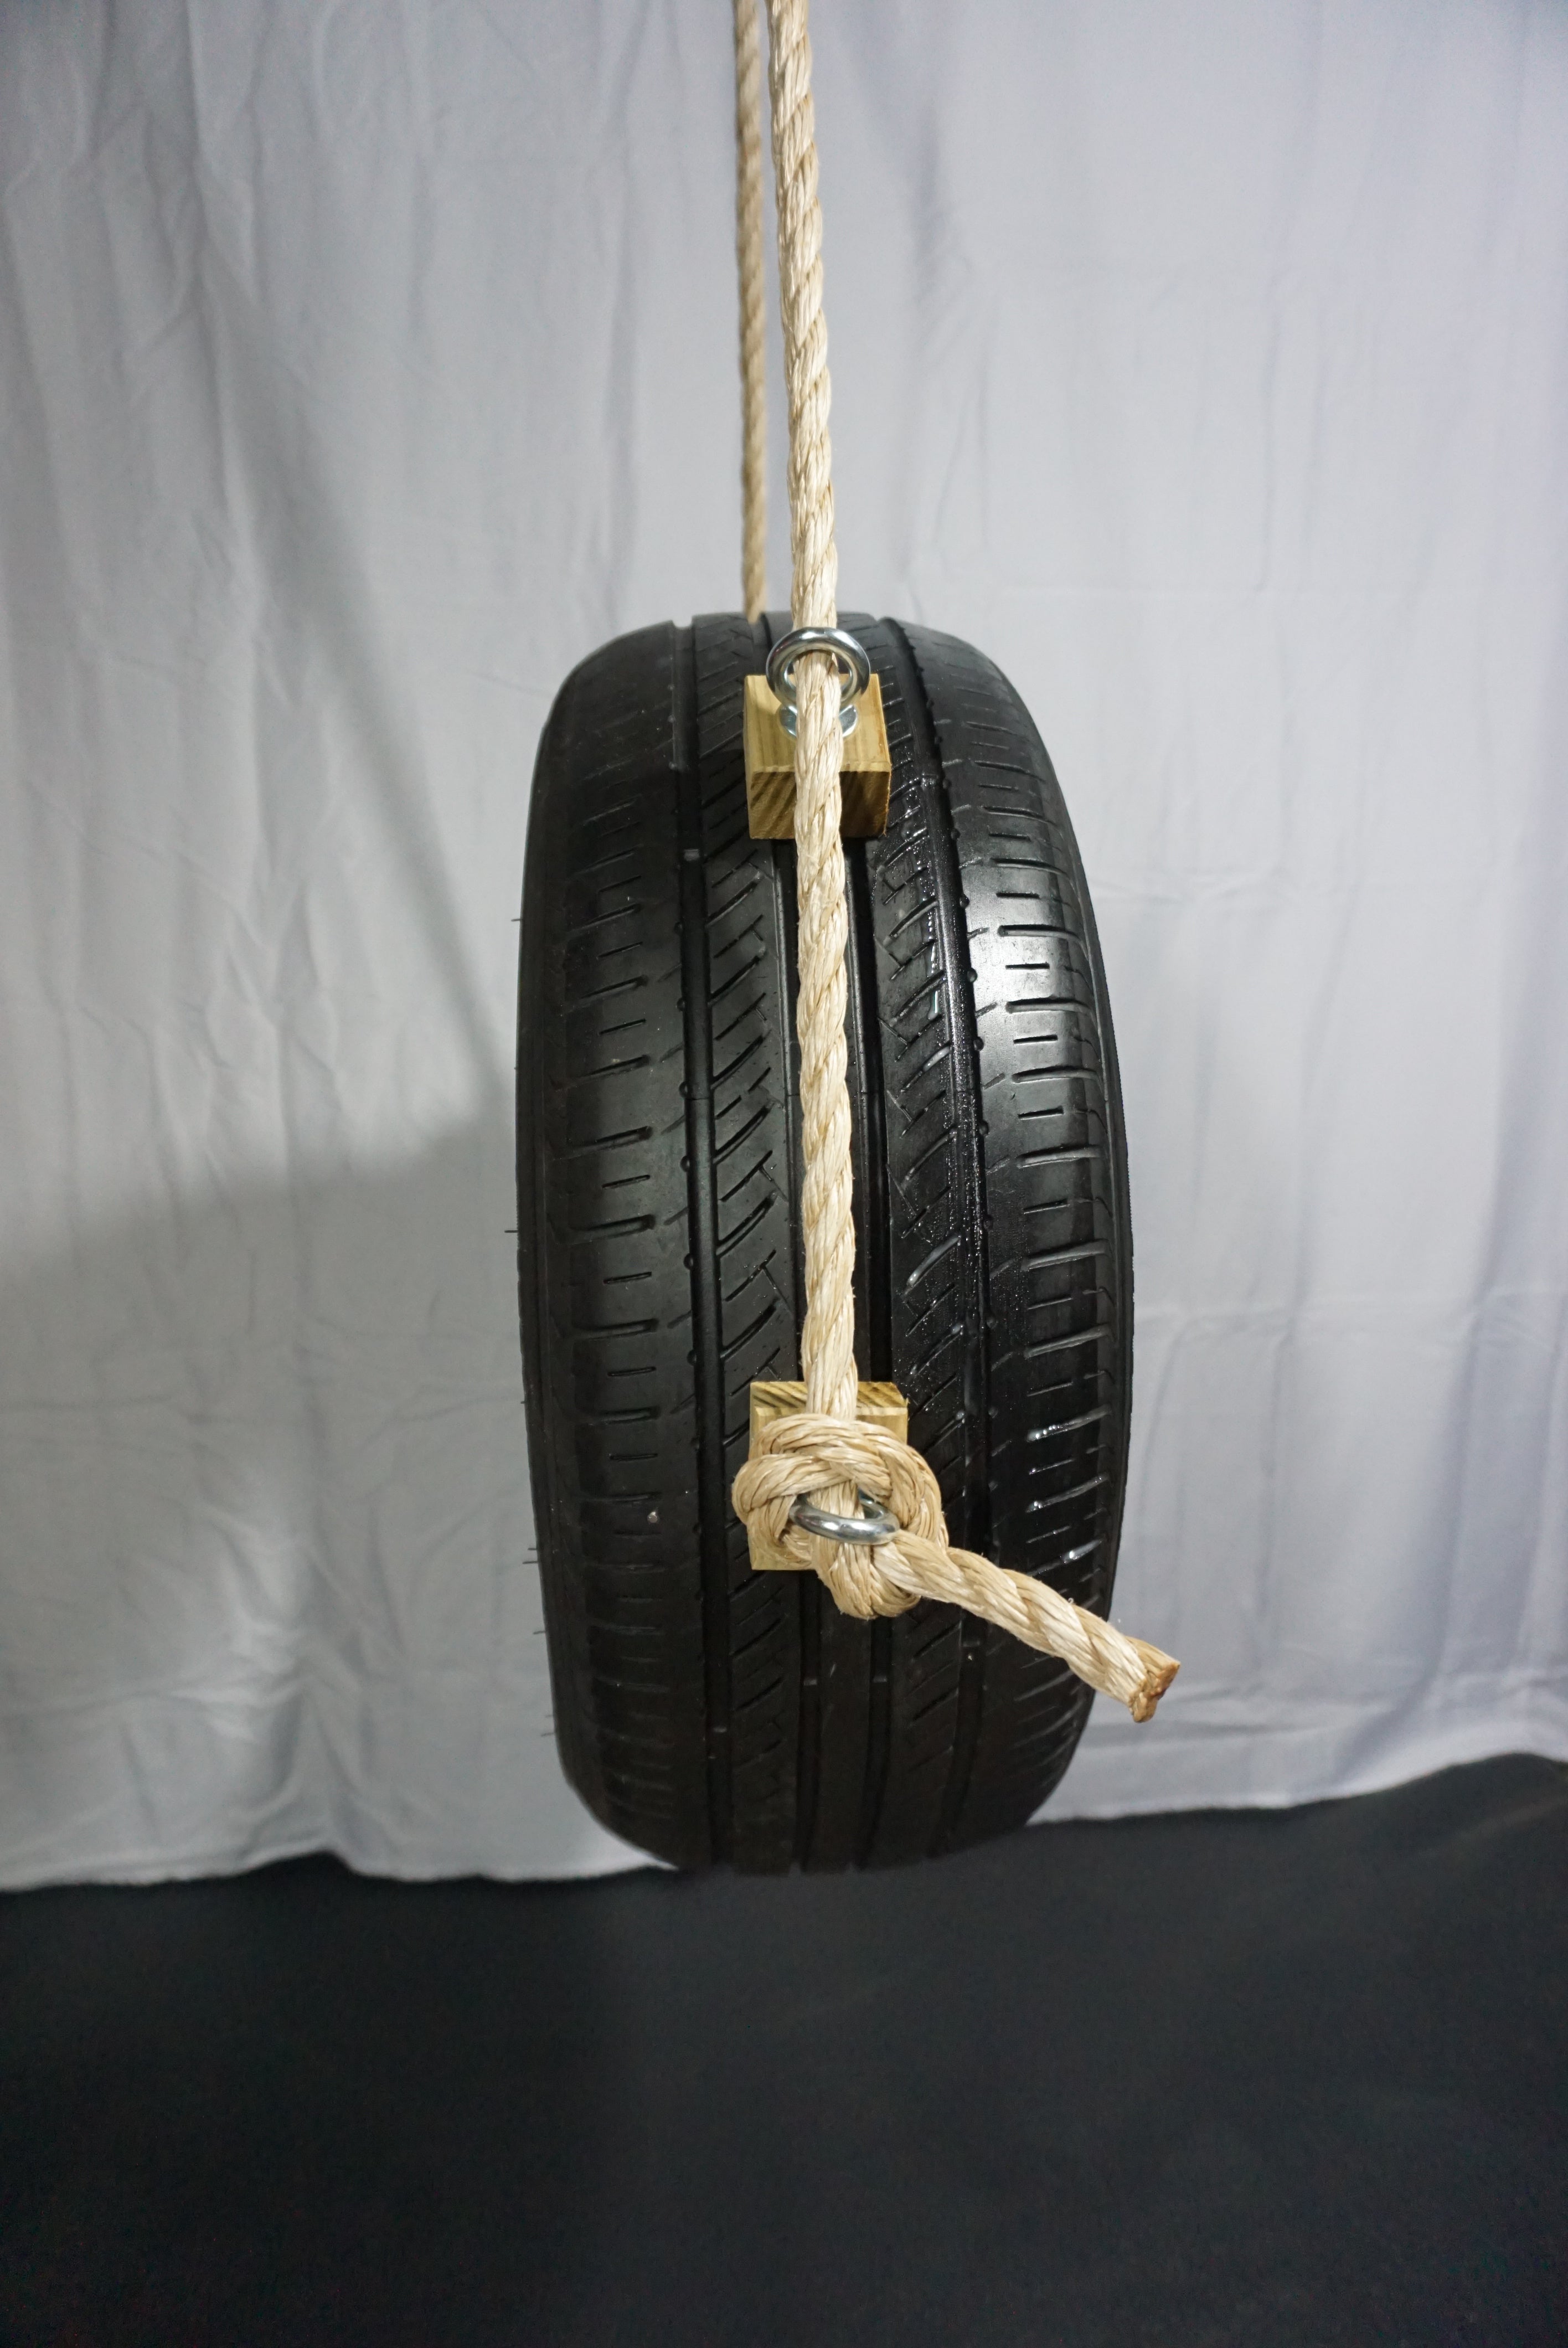 Recycled Old Fashioned Tire Swing Kit Wood Tree Swings